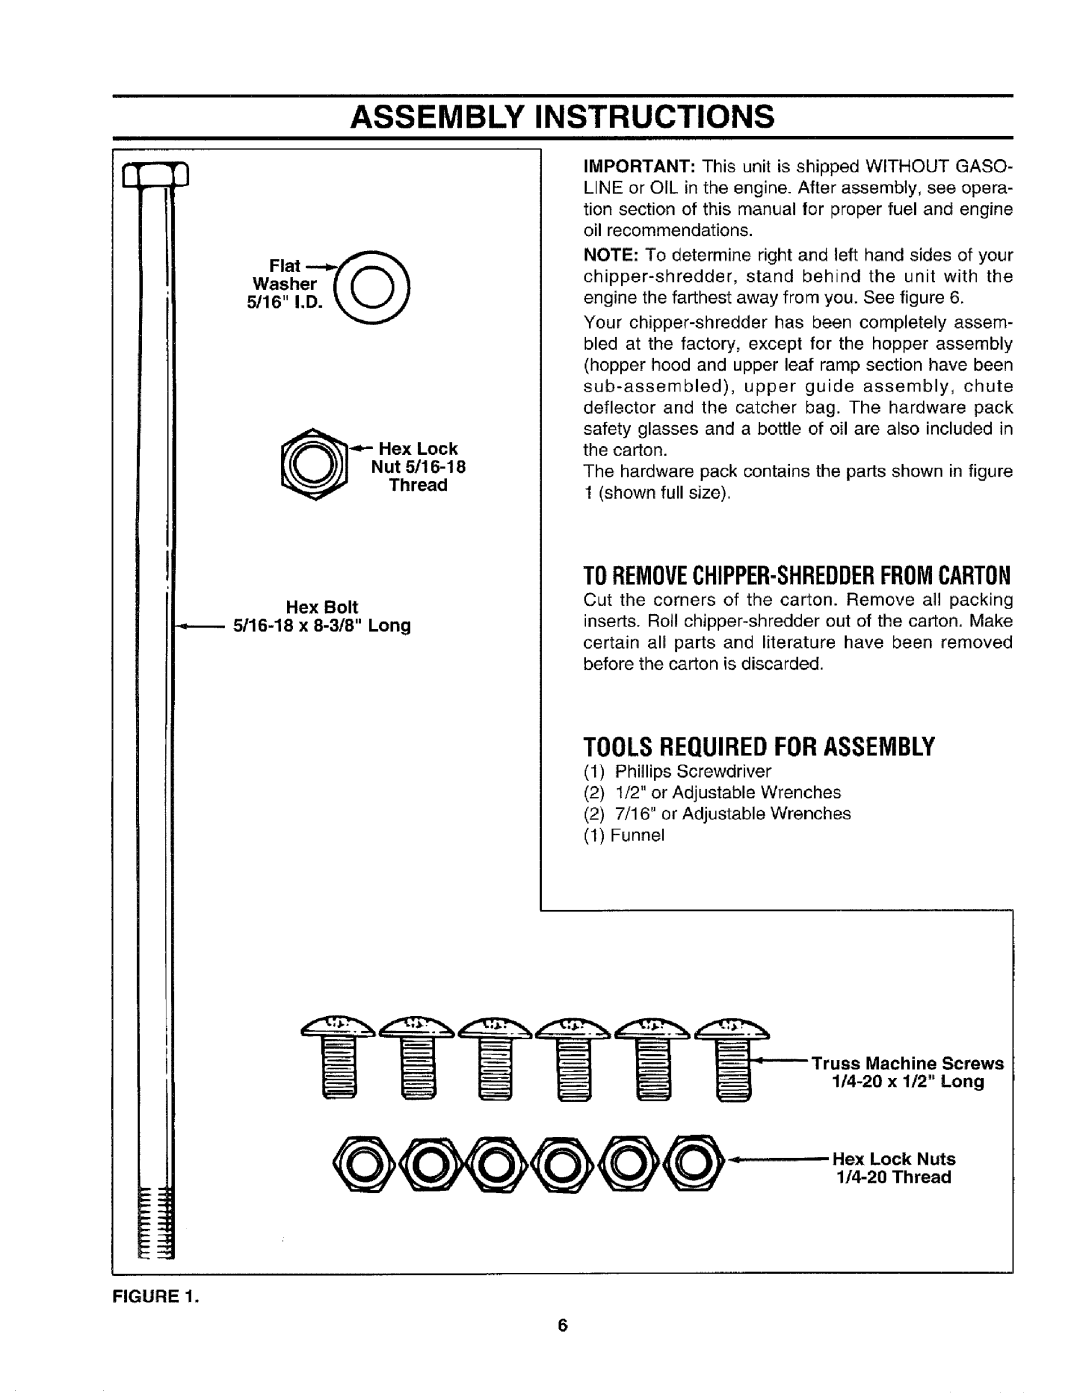 Craftsman 79585 manual Instructions, Tools Requiredfor Assembly, Toremovechipper-Shredderfromcarton 